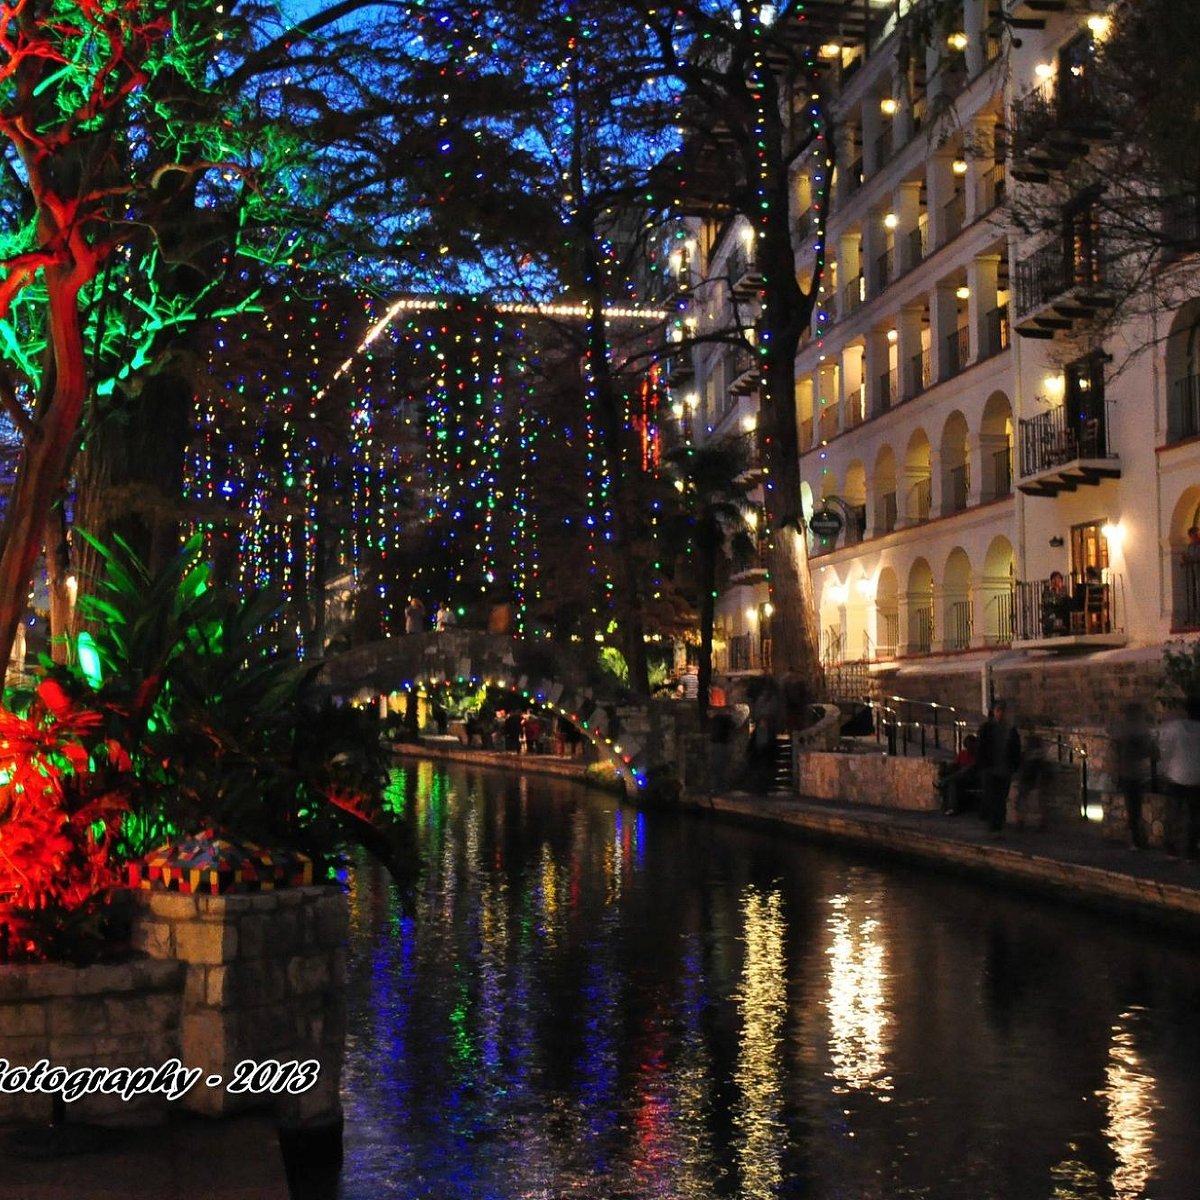 What to expect when visiting the Riverwalk in San Antonio - San